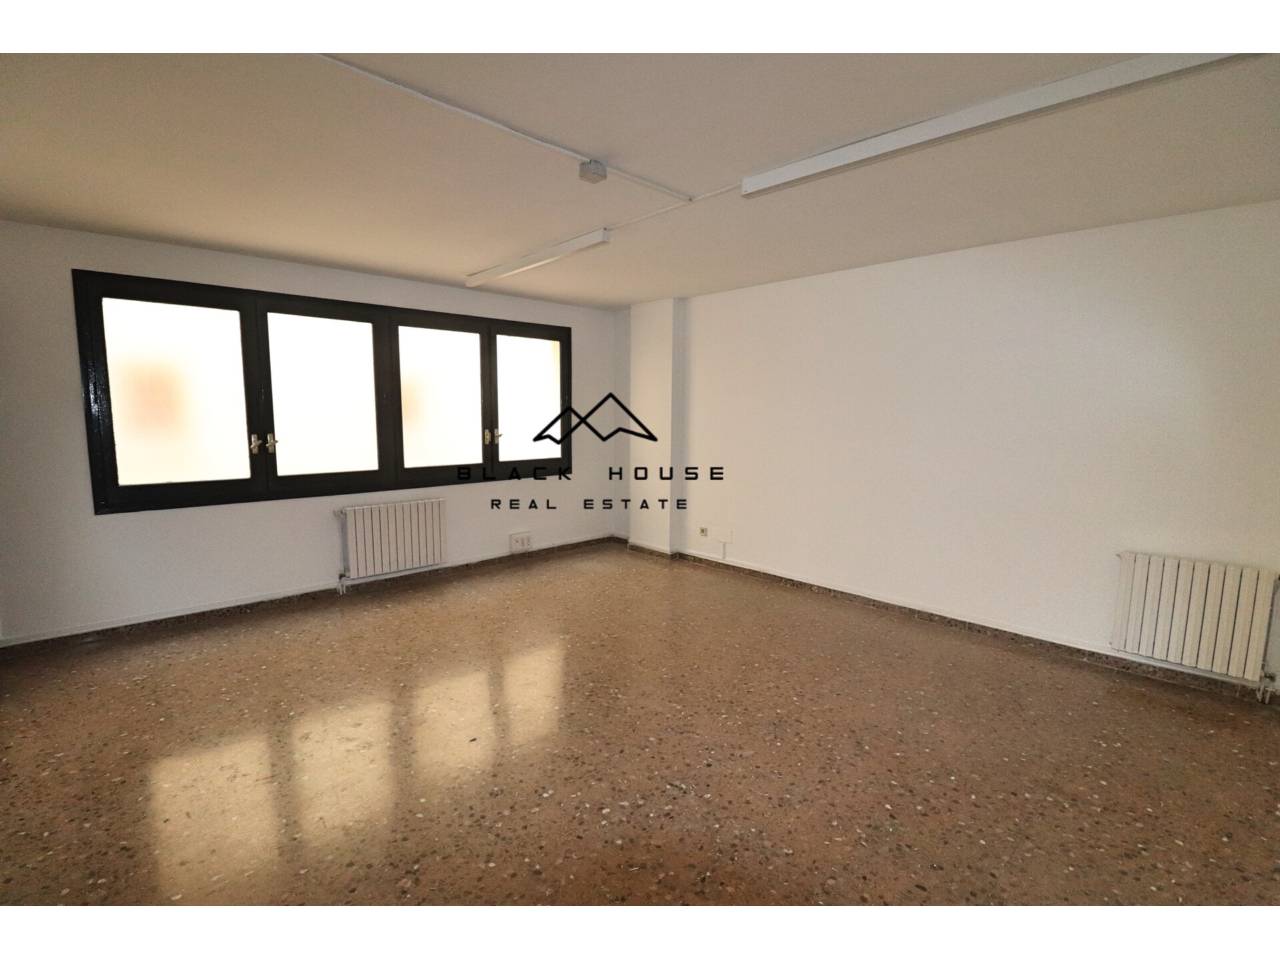 Office for rent, in the center of Andorra la Vella